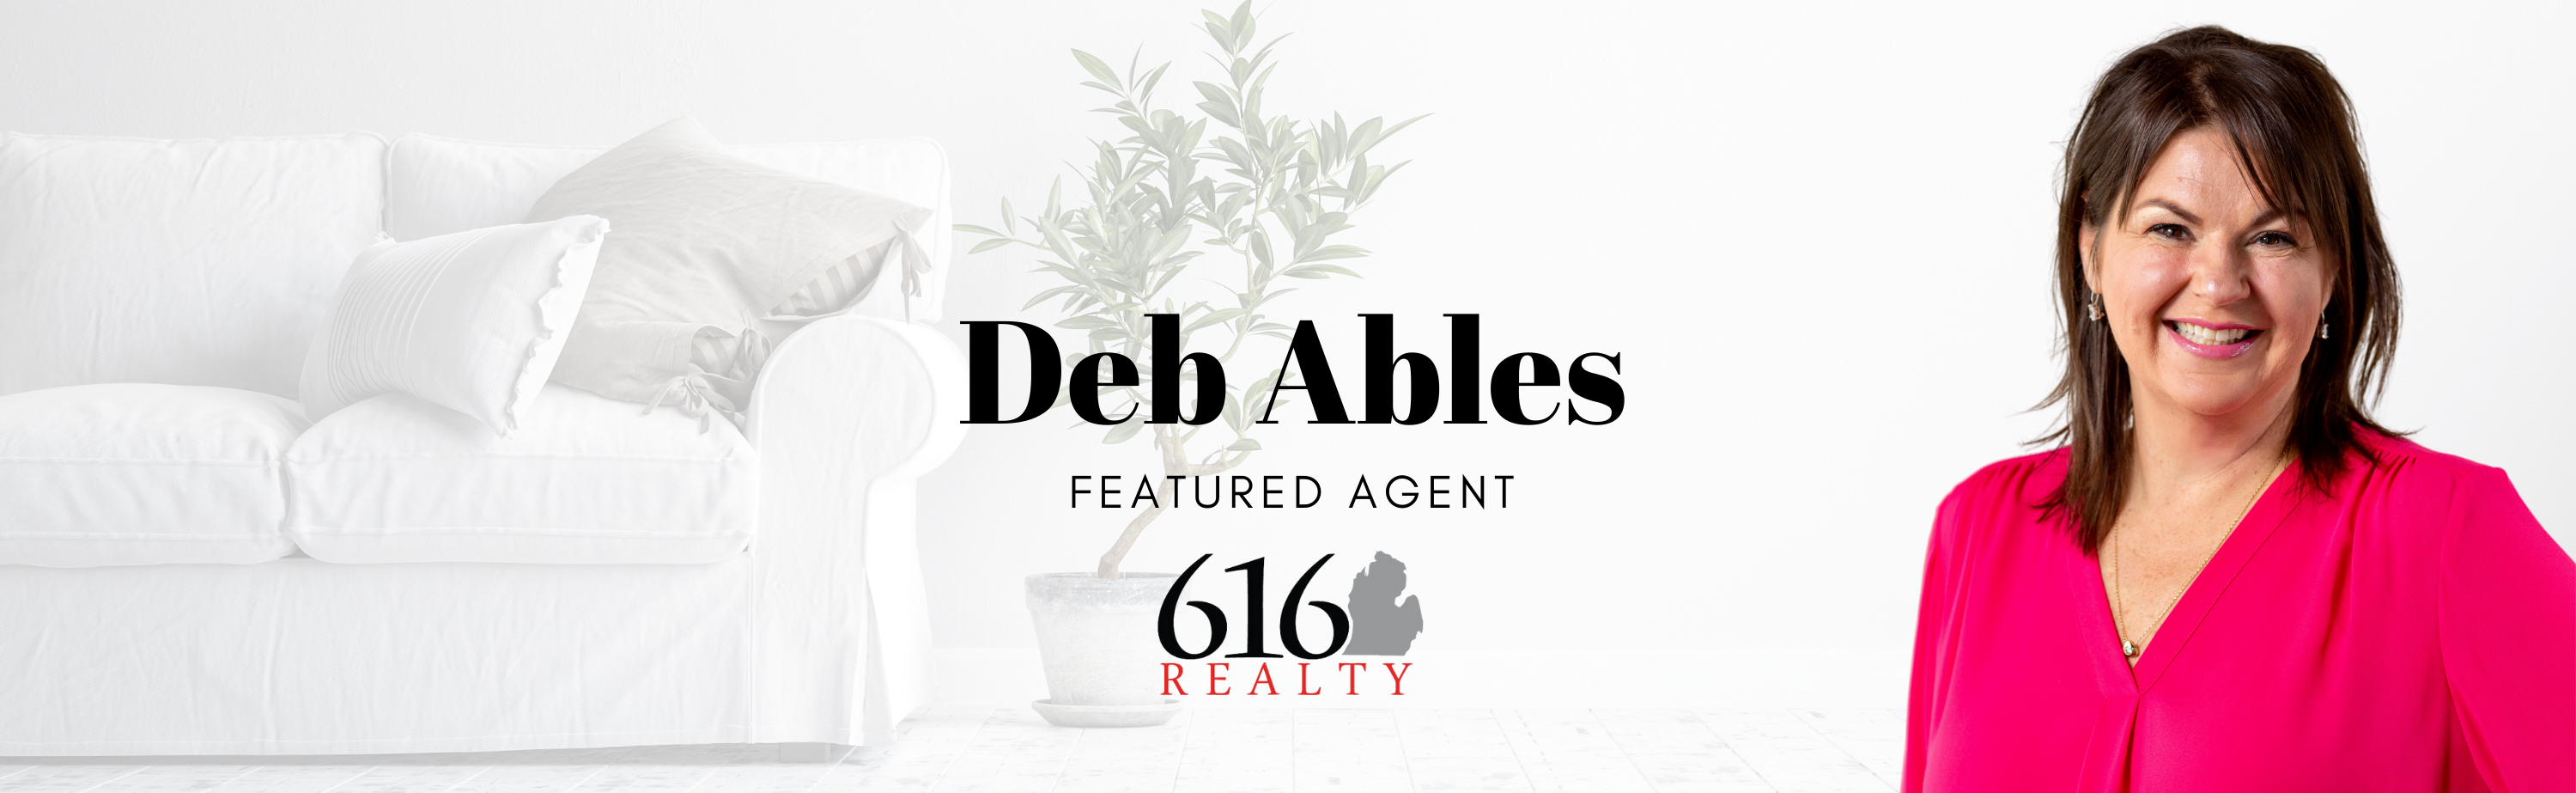 Deb-Ables-Featured-Agent-Banner-2